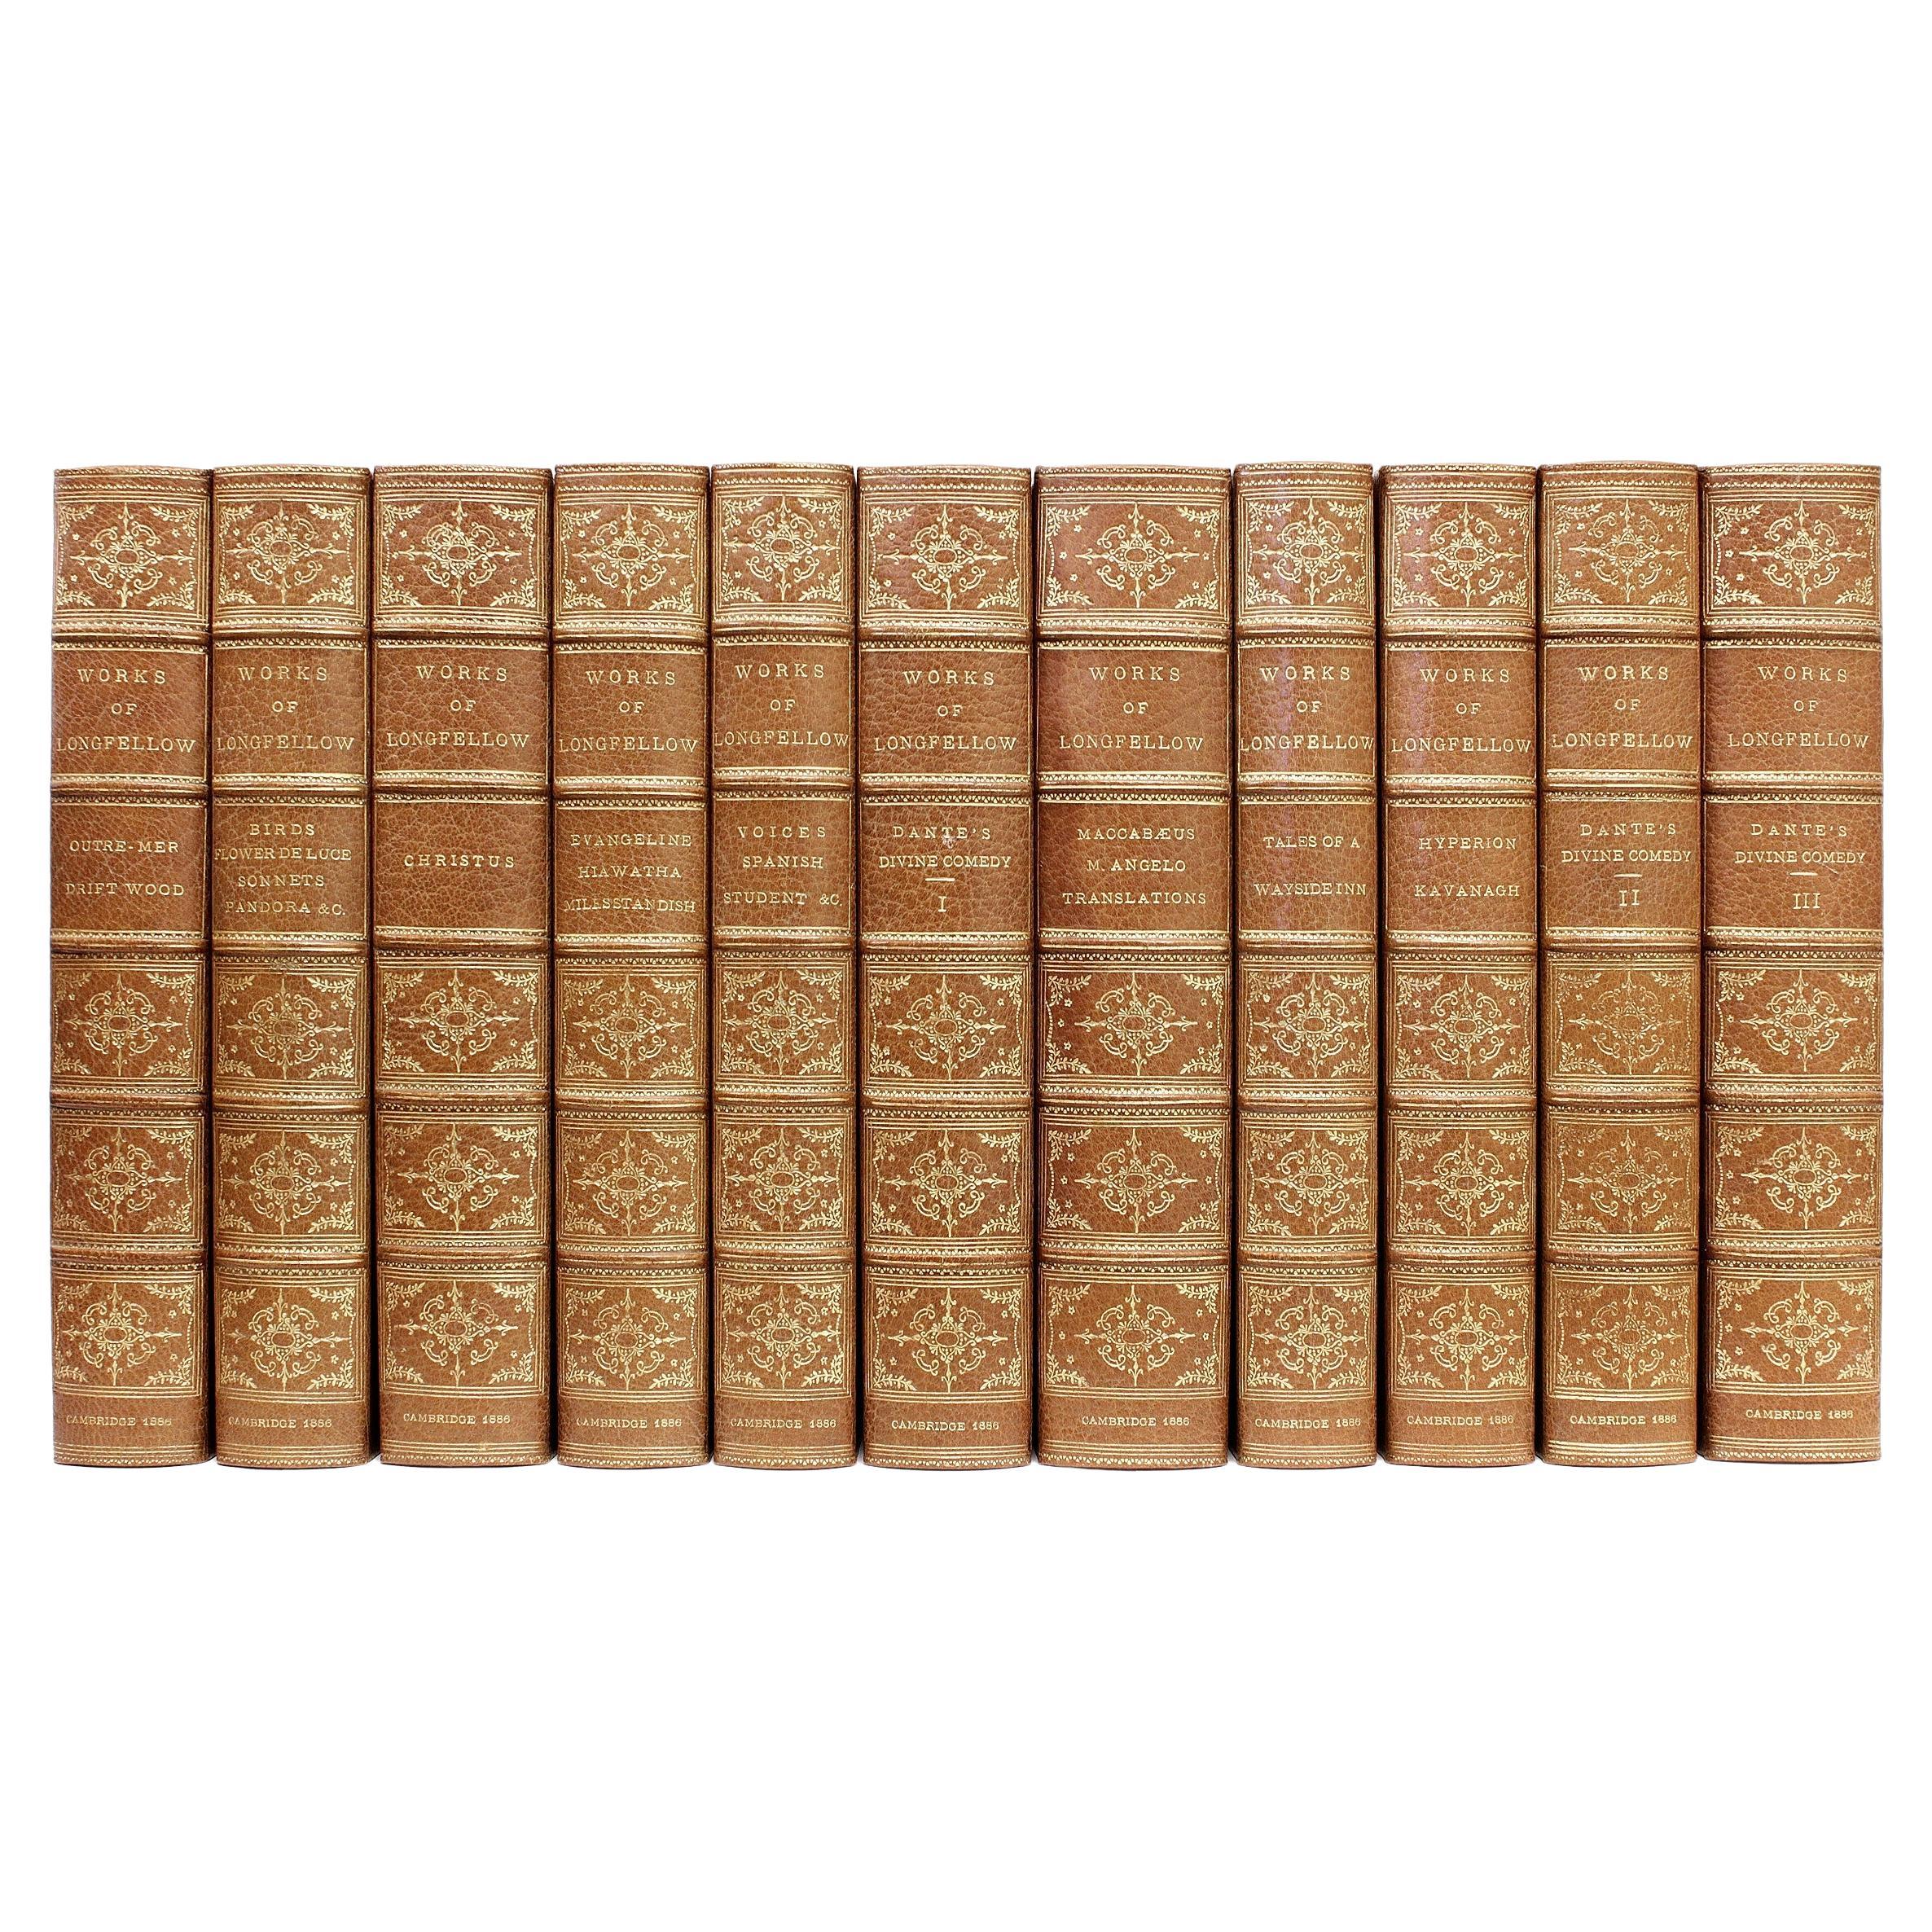 Complete Works Of Henry Wadsworth Longfellow. 11 vols. LARGE PAPER EDITION 1886